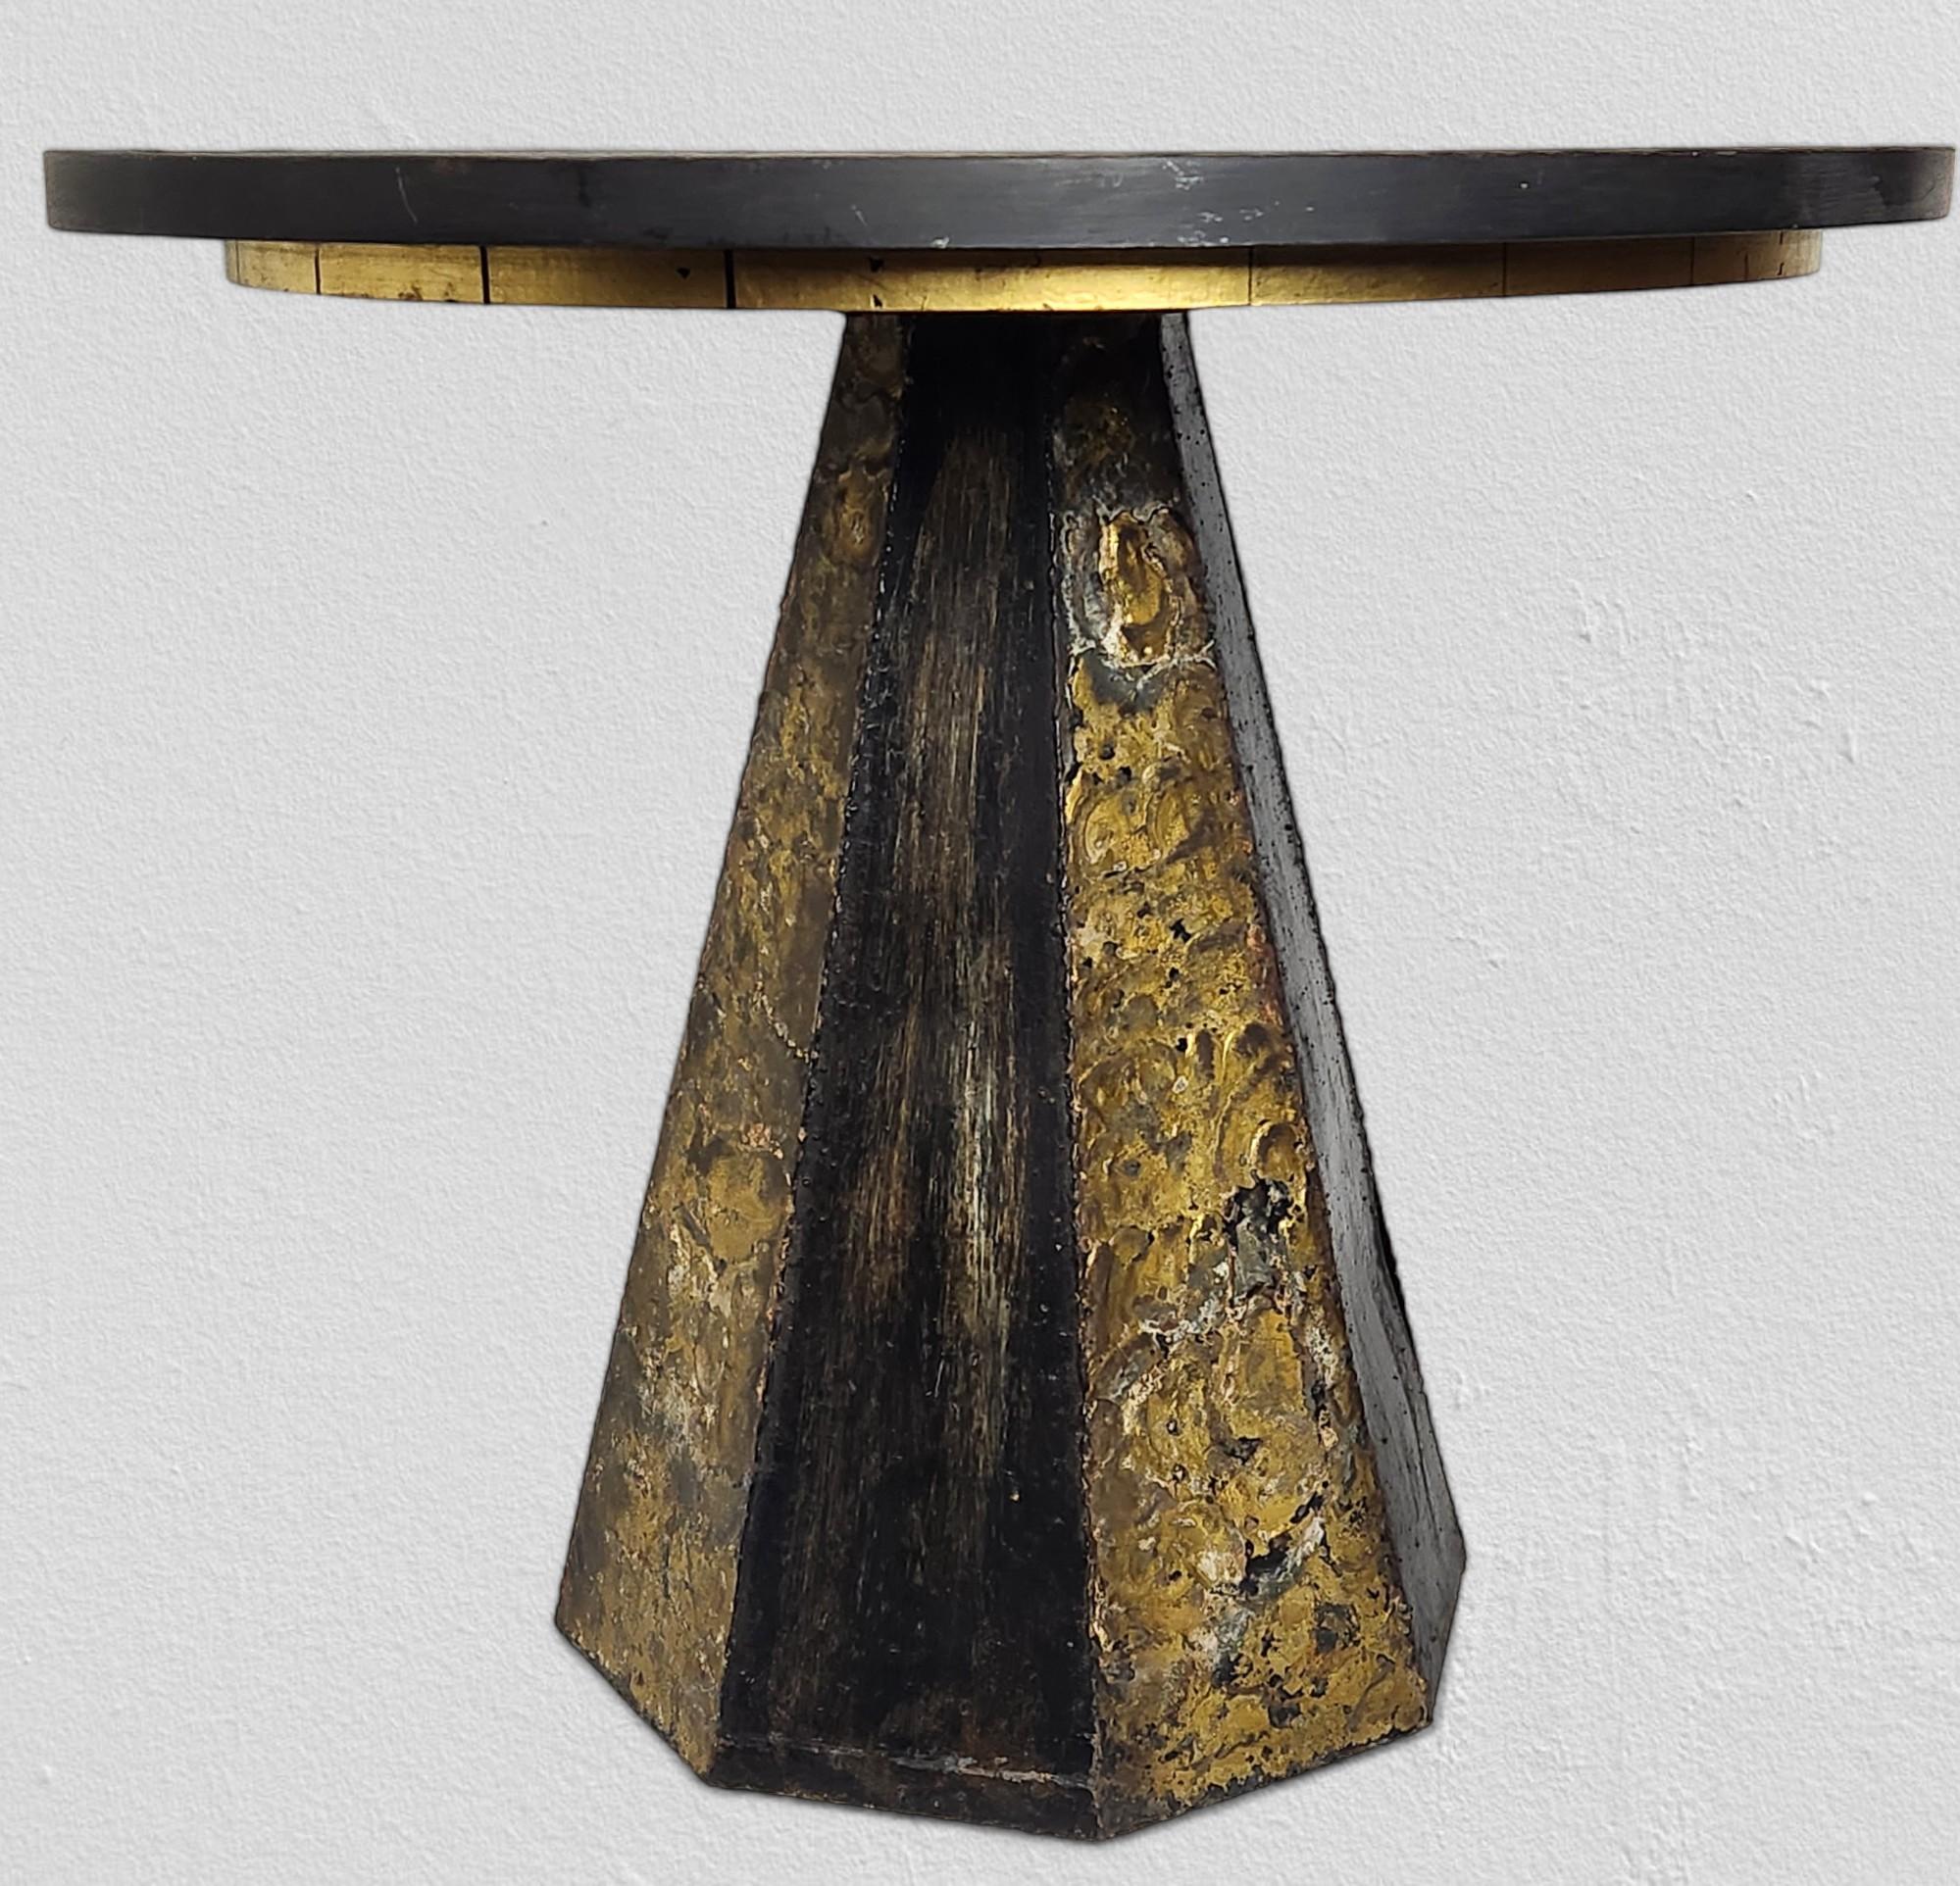 Paul Evans round natural cleft slate top side table circa mid 1960s.
An octagonal tapered welded oxidized steel and braised brass base with a modeled surface.
The wooden disc that supports the original cleft slate top has a gilded edge in 24 kt gold